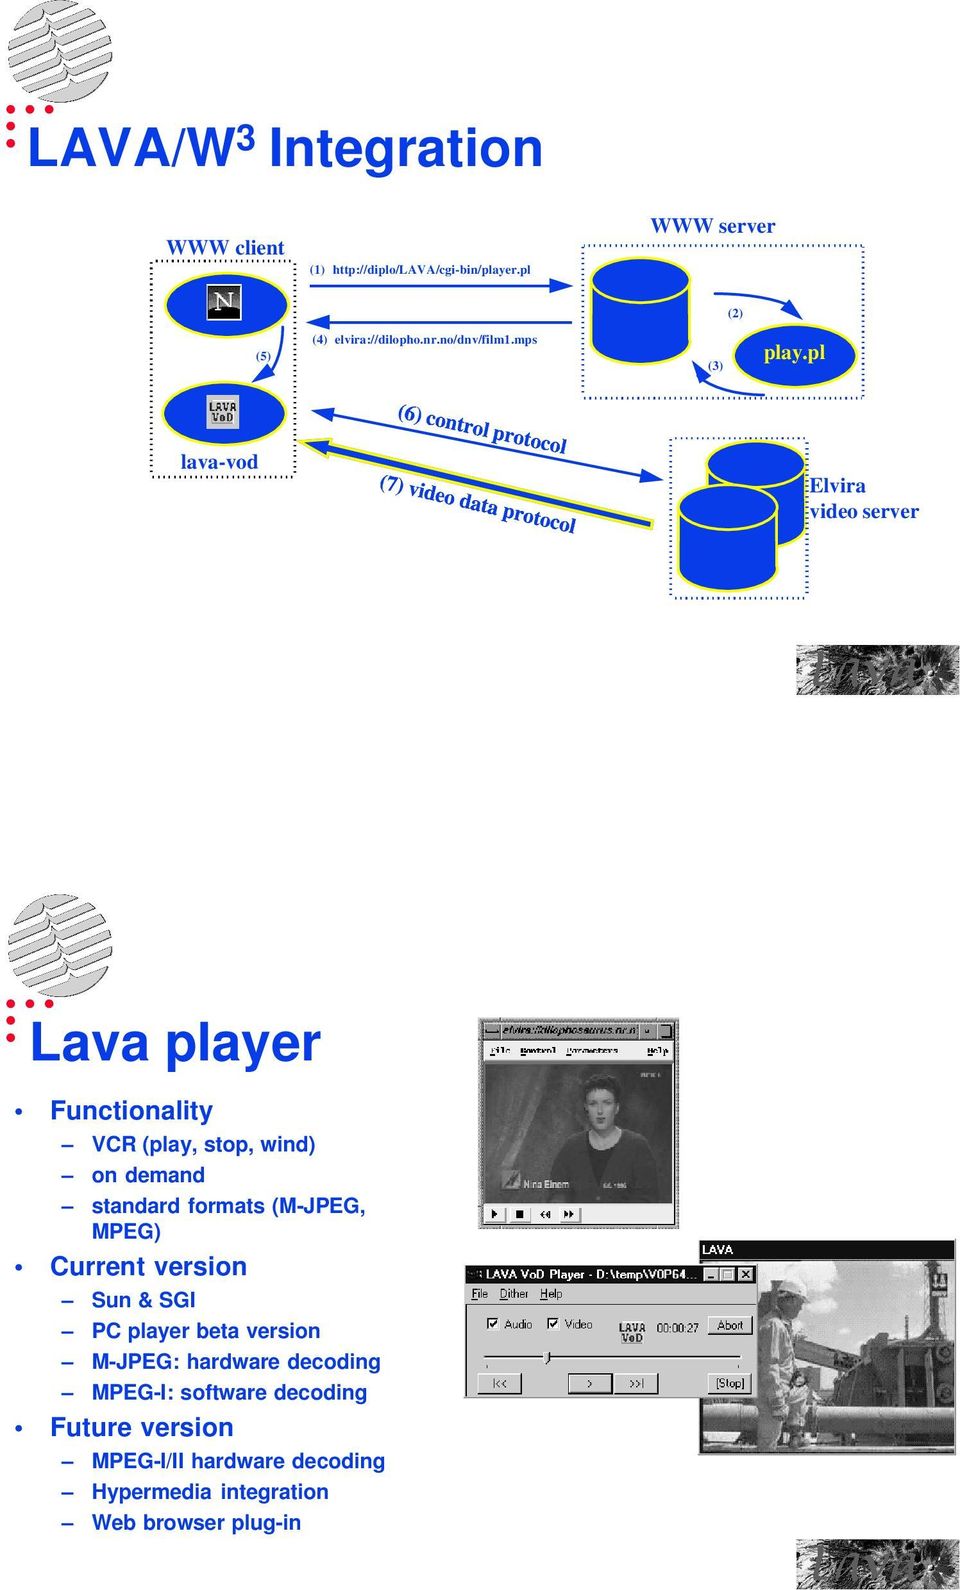 pl Elvira video server Lava player Functionality VCR (play, stop, wind) on demand standard formats (M-JPEG, MPEG) Current